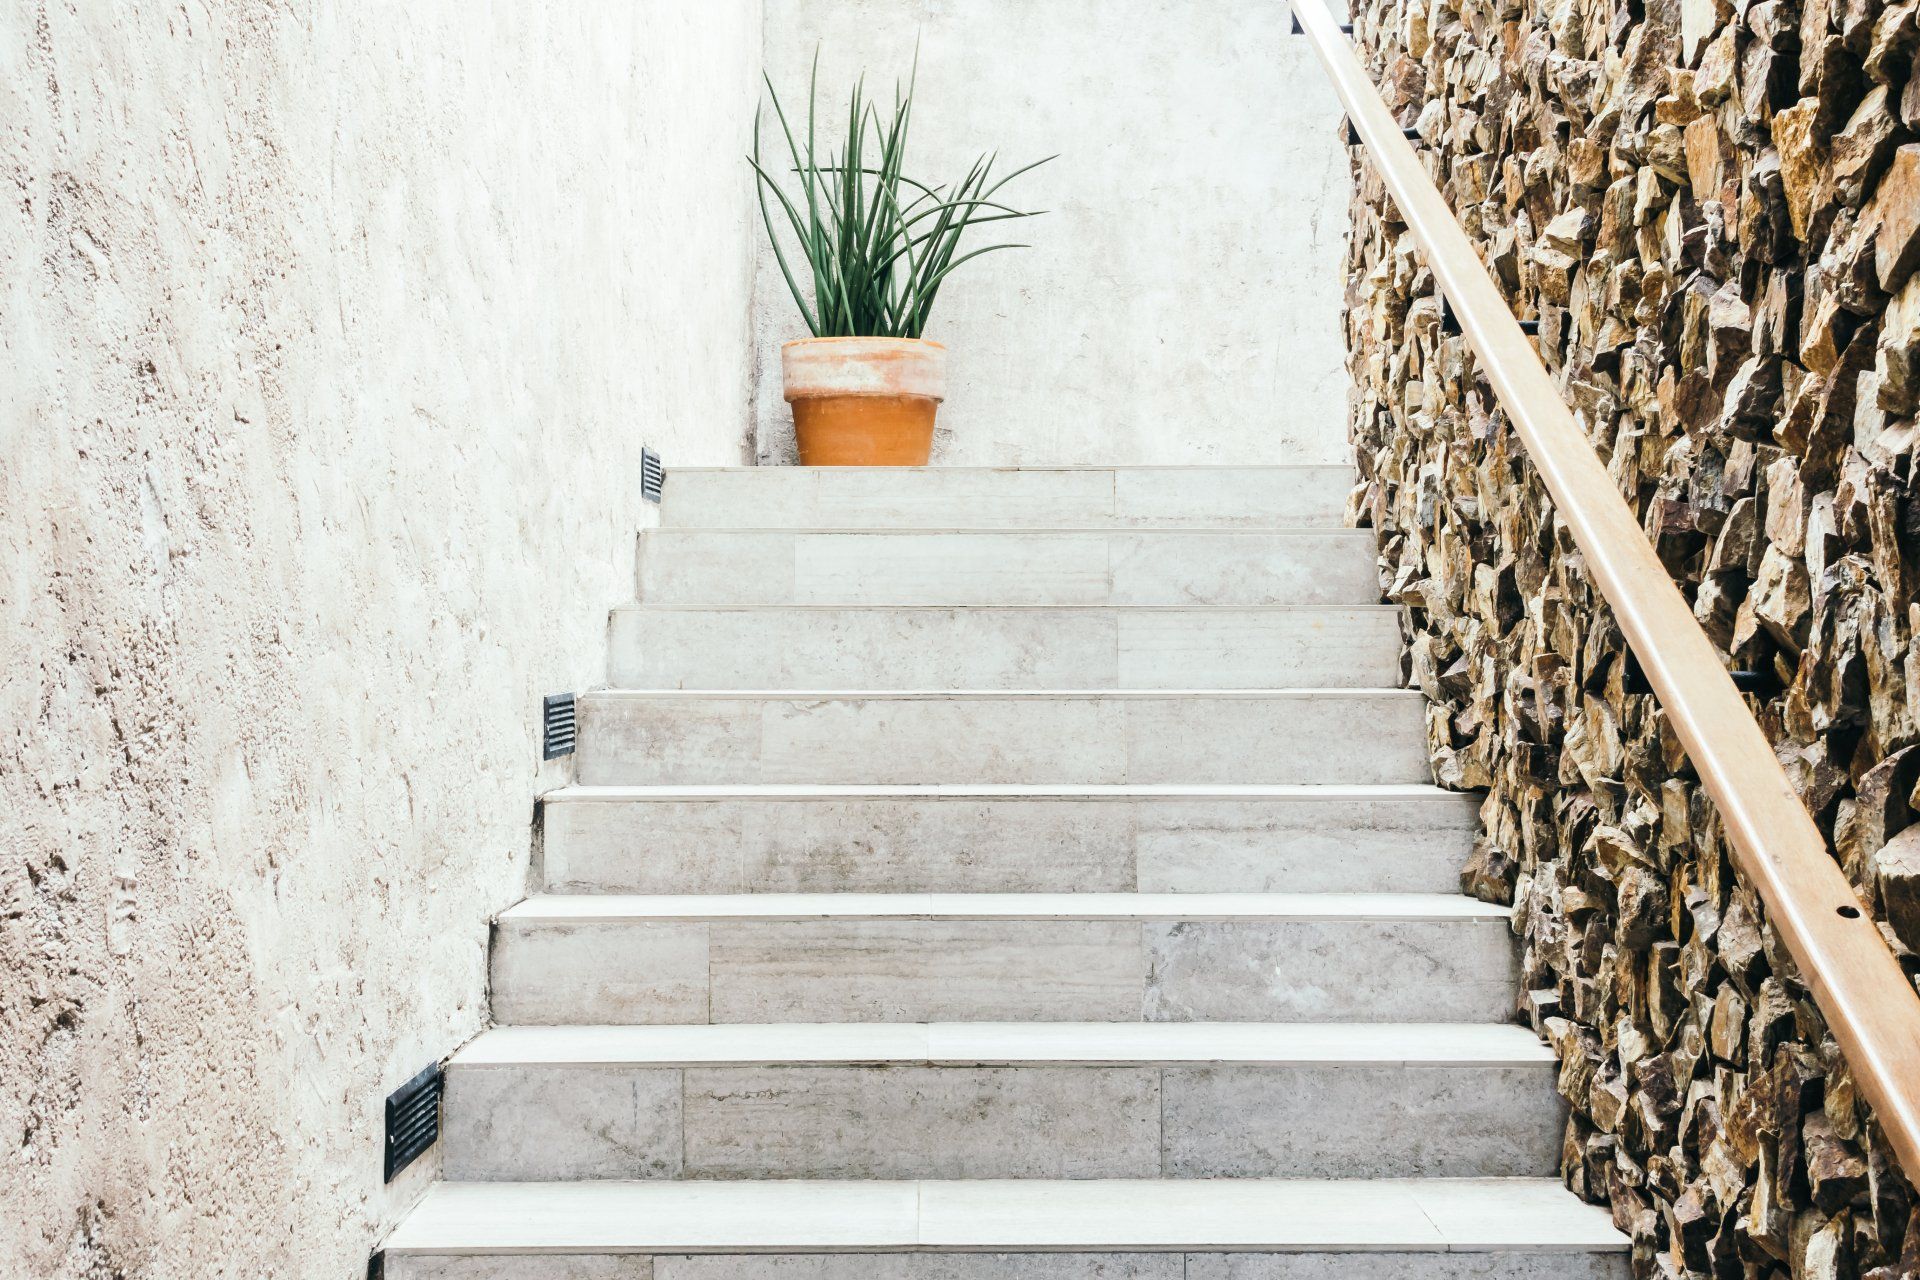 Picture of a concrete stairway leading up to the entrance to a building.